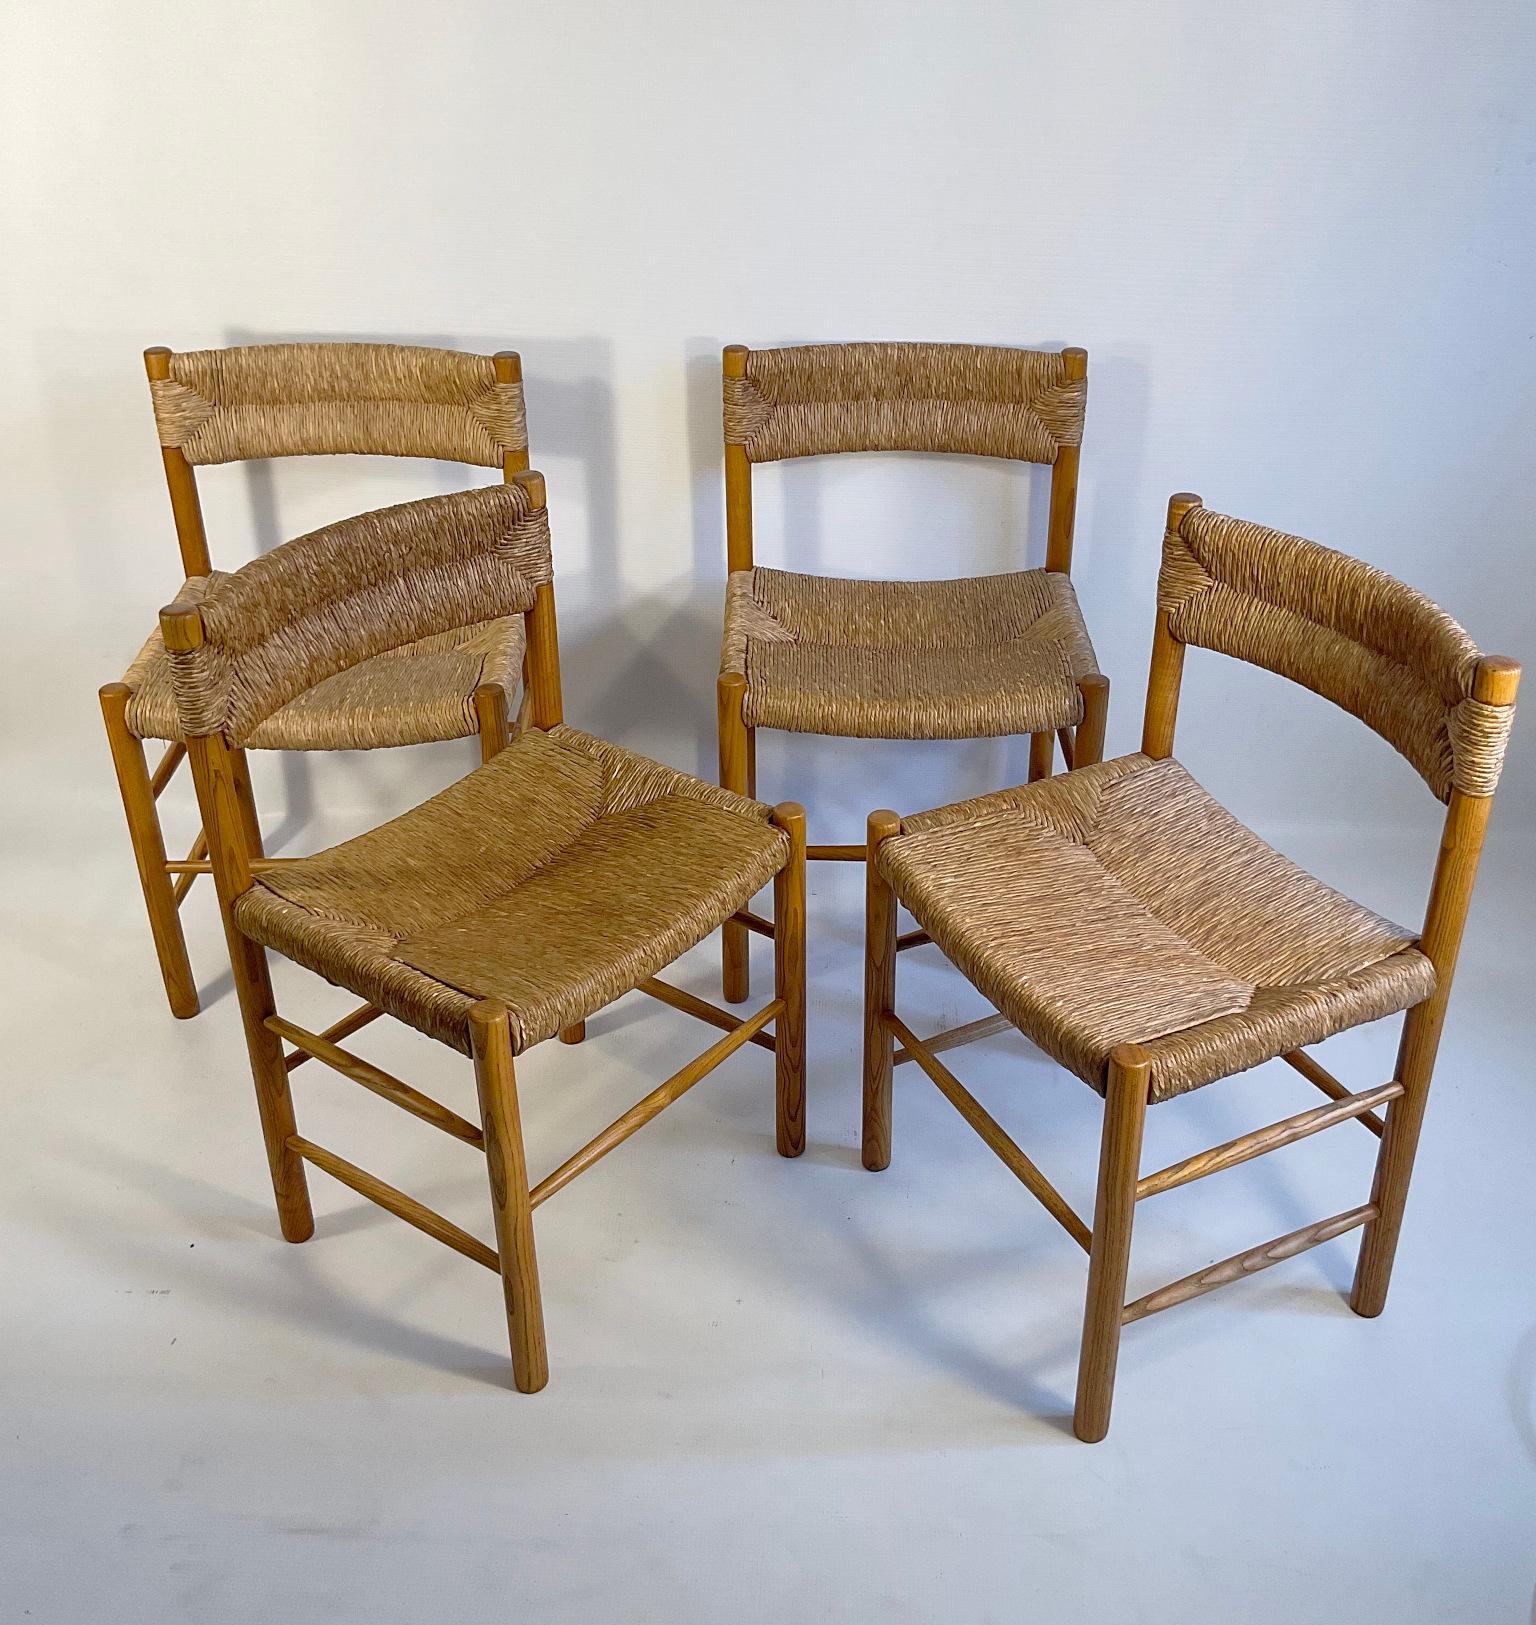 French Provincial Set of Four Dordogne Chairs by Robert Sentou for Charlotte Perriand France 1960s For Sale